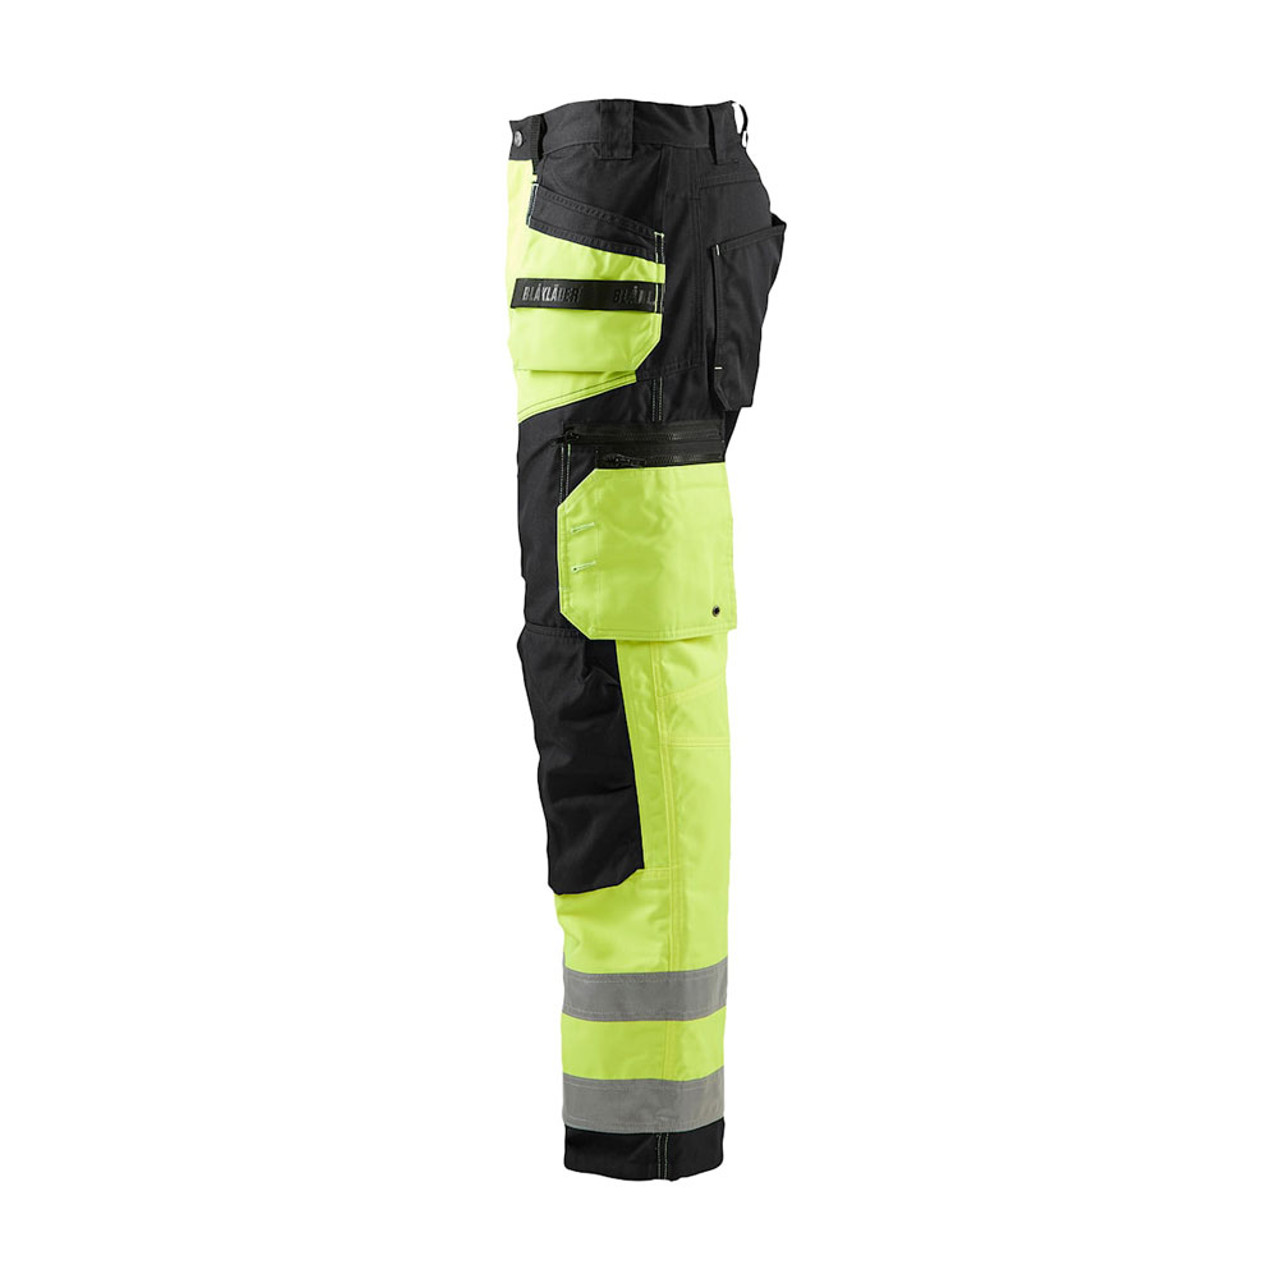 Snickers 6276 ProtecWork, Work Trousers Holster Pockets, High-Vis Class 1